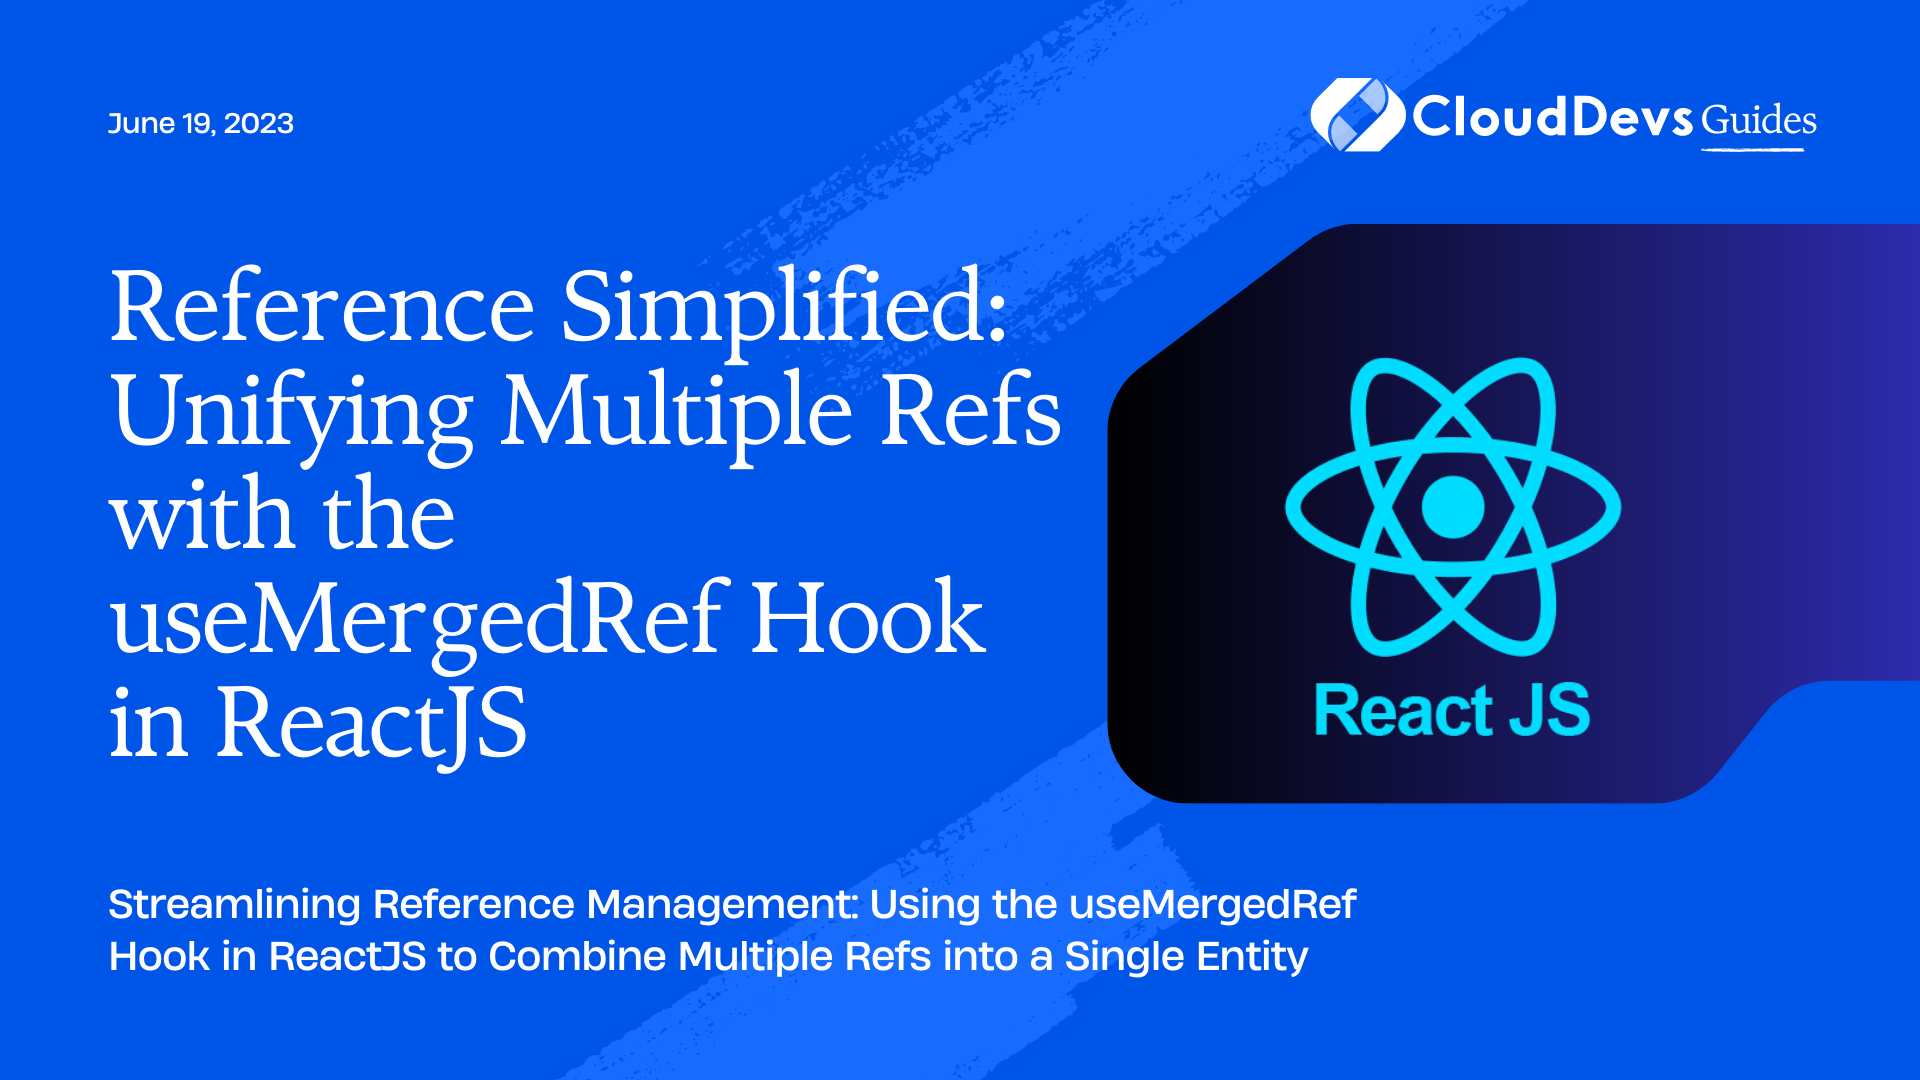 Reference Simplified: Unifying Multiple Refs with the useMergedRef Hook in ReactJS